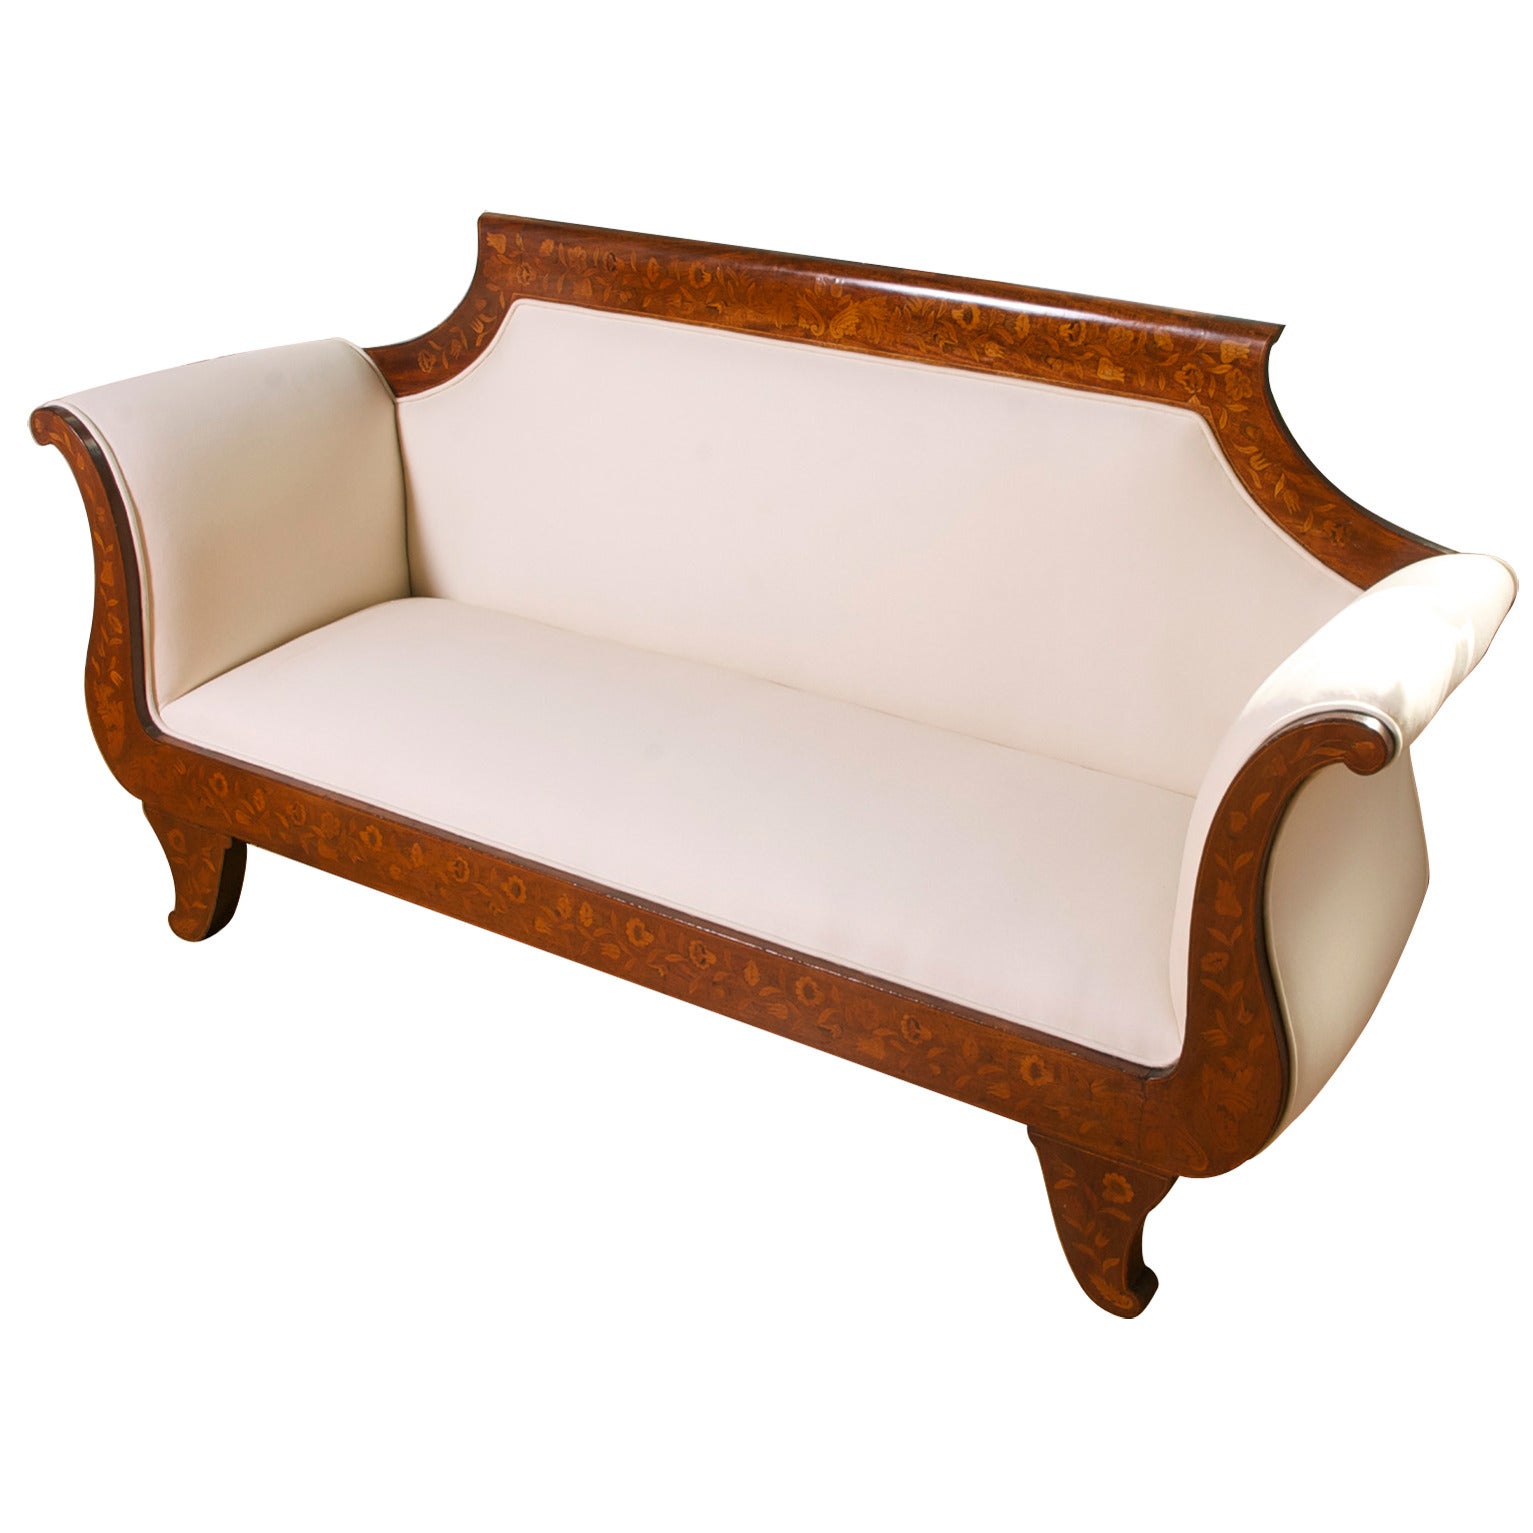 Polished Dutch Marquetry Empire Settee, circa 1825 For Sale